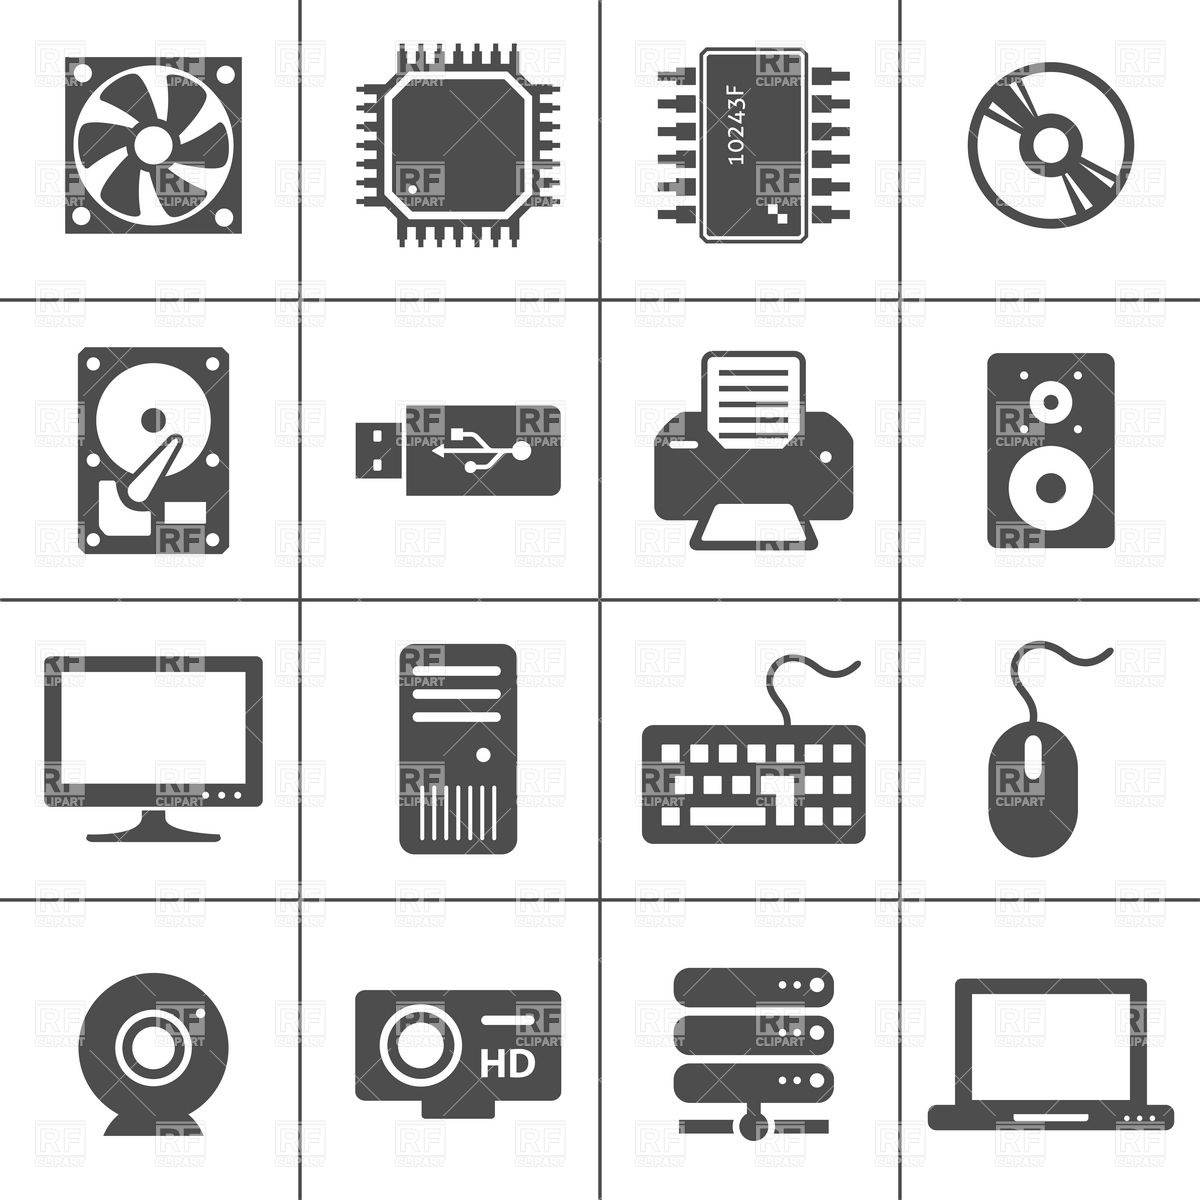     Peripheral Devices Icons 12507 Download Royalty Free Vector Clipart